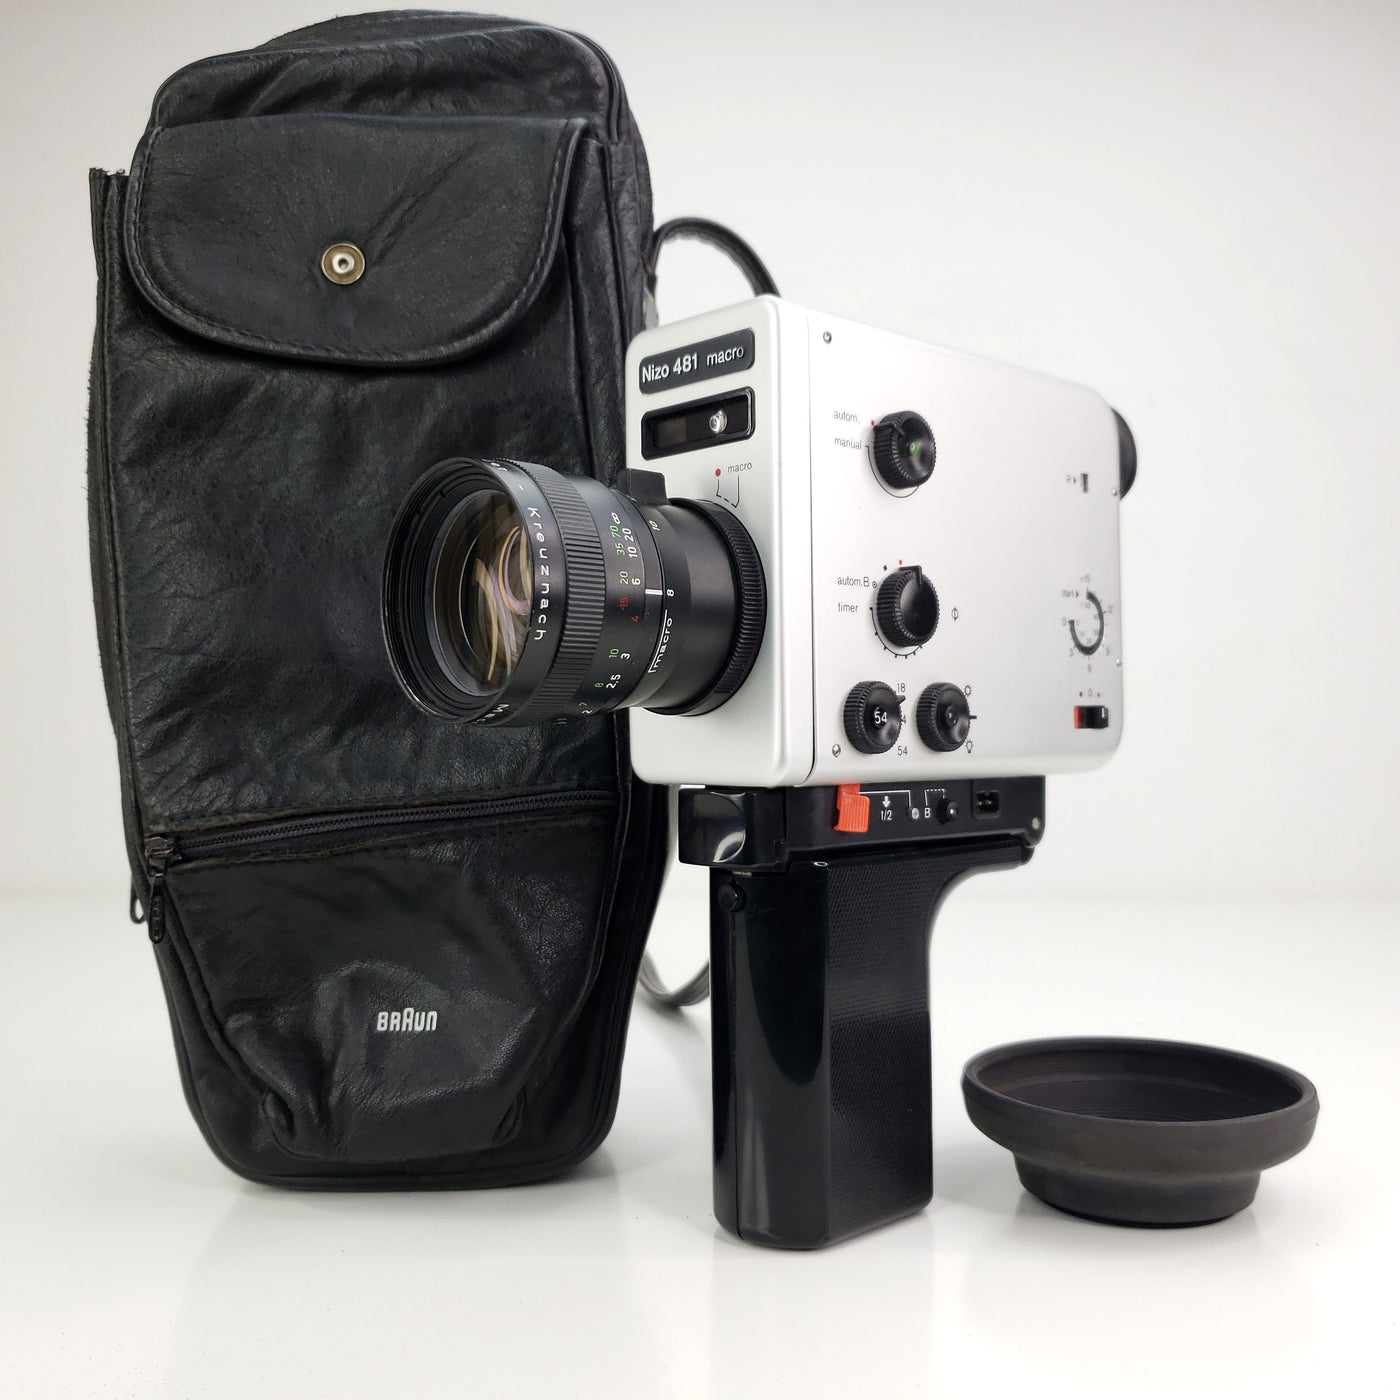 Nizo 481 Macro - Fully Serviced by MonsterFlipsUSA - Includes Light meter battery adapters, and Bag! Super 8 Cameras Braun Nizo 